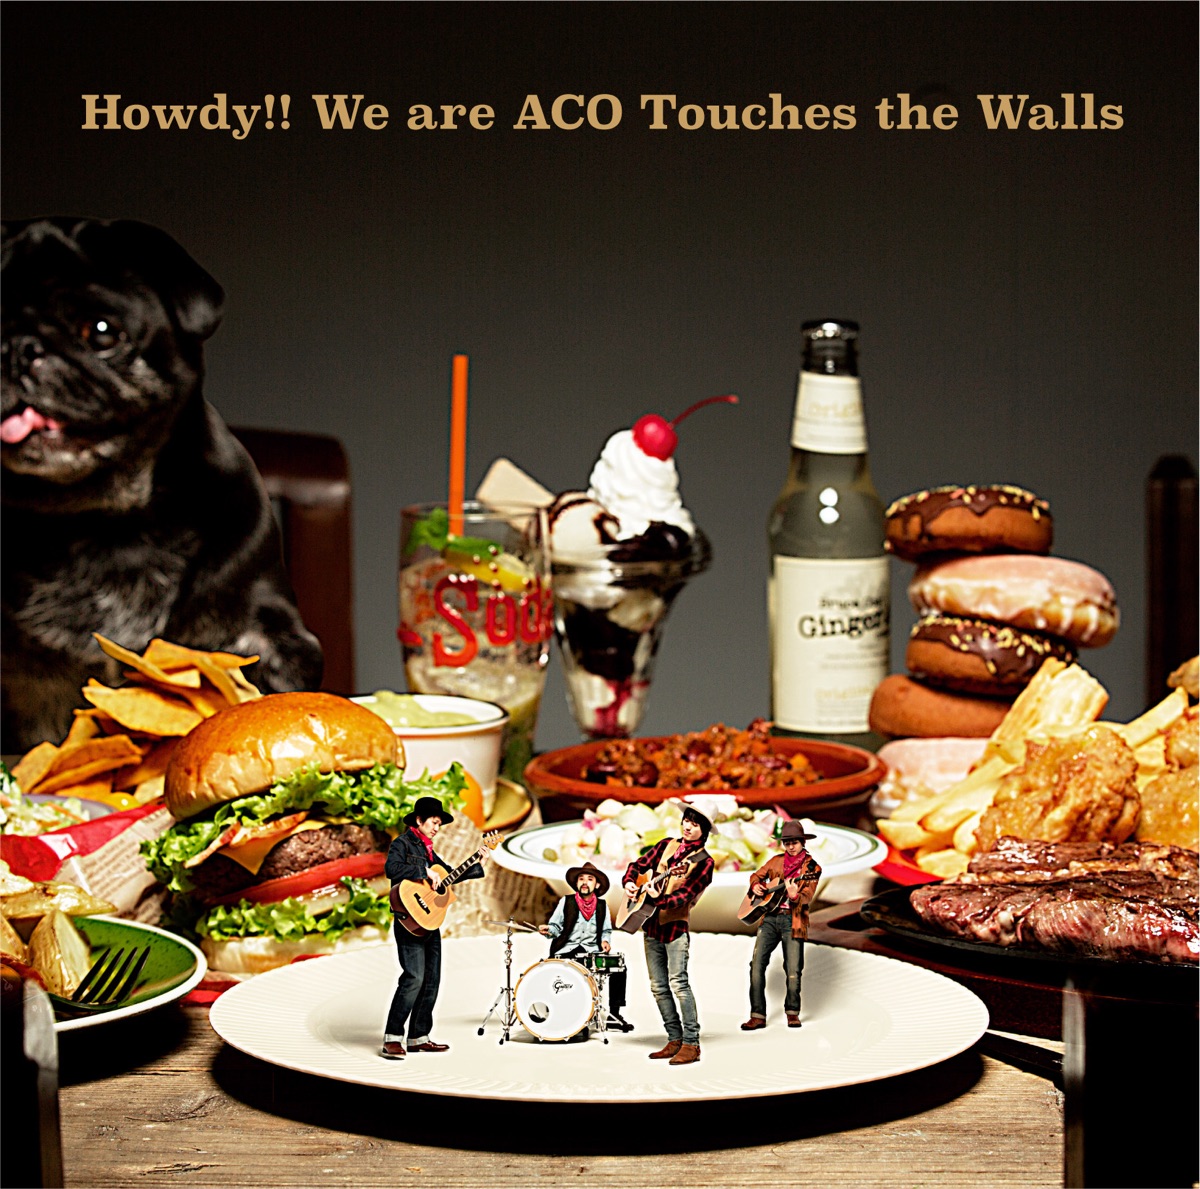 Howdy!! We are ACO Touches the Walls - Album by NICO Touches the